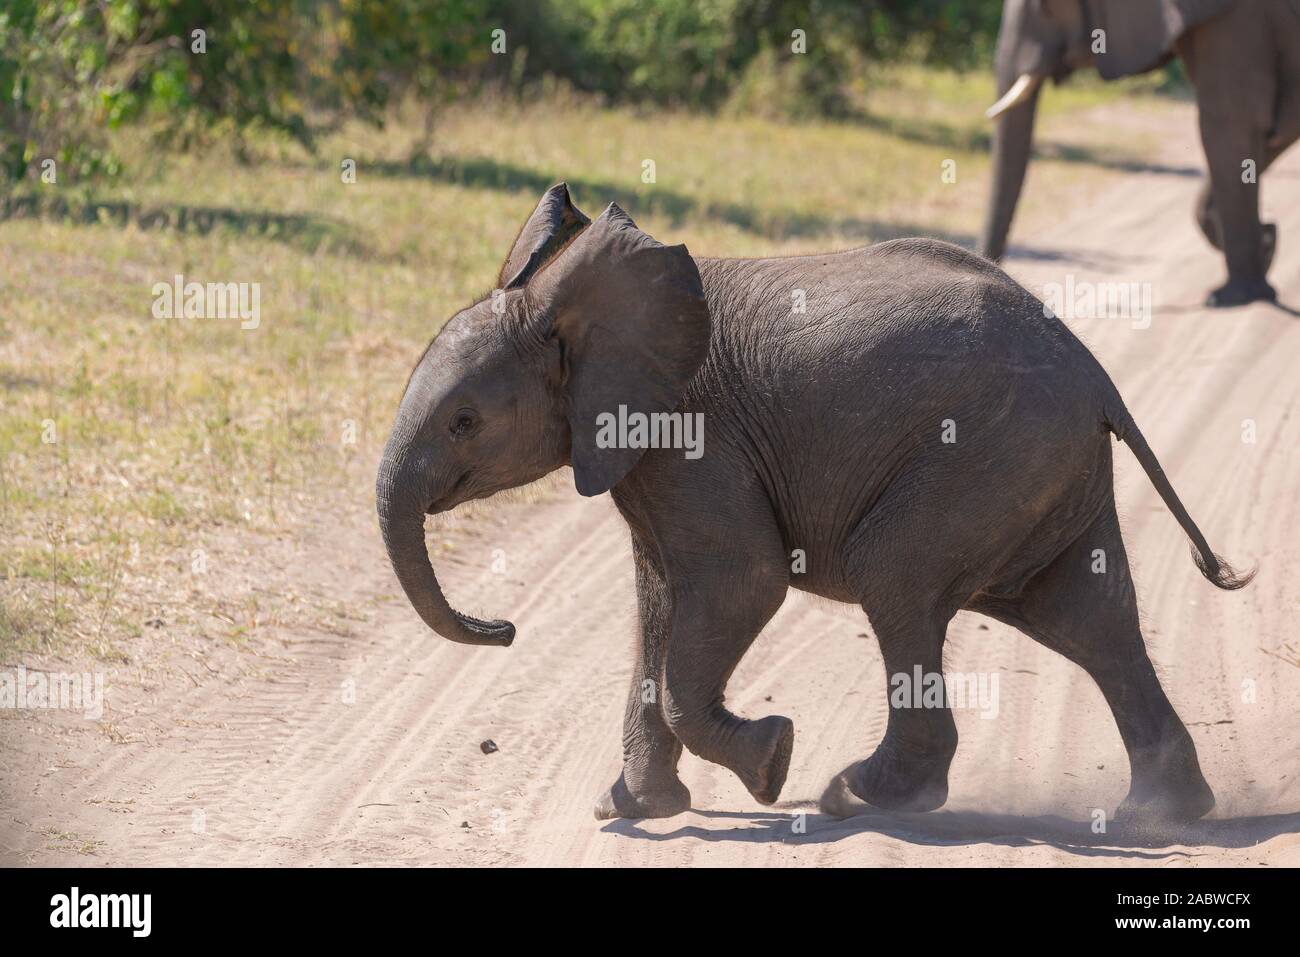 a young elephant in the african savannah Stock Photo